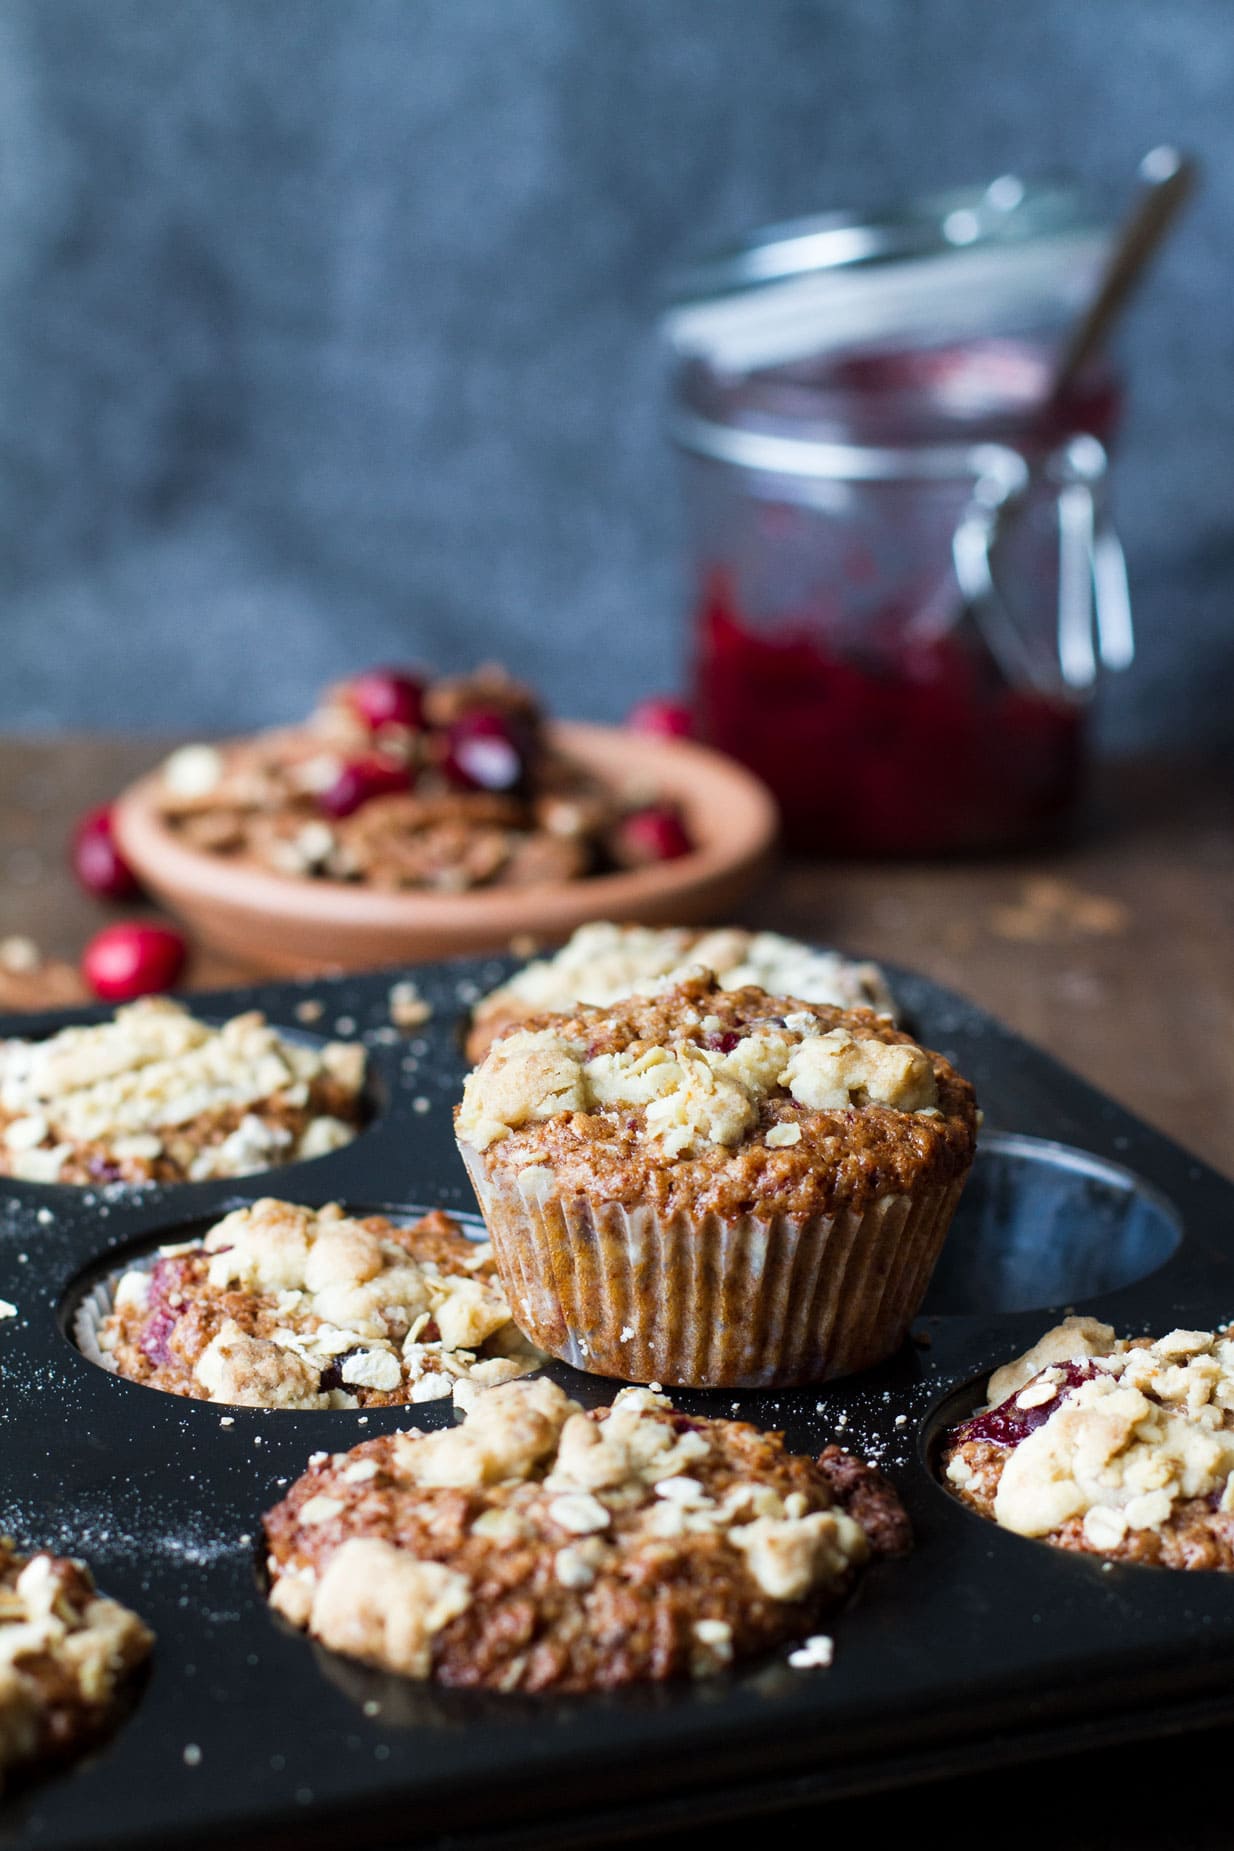 Cranberry sauce breakfast muffins on a muffin tin. Cranberry sauce in the background.